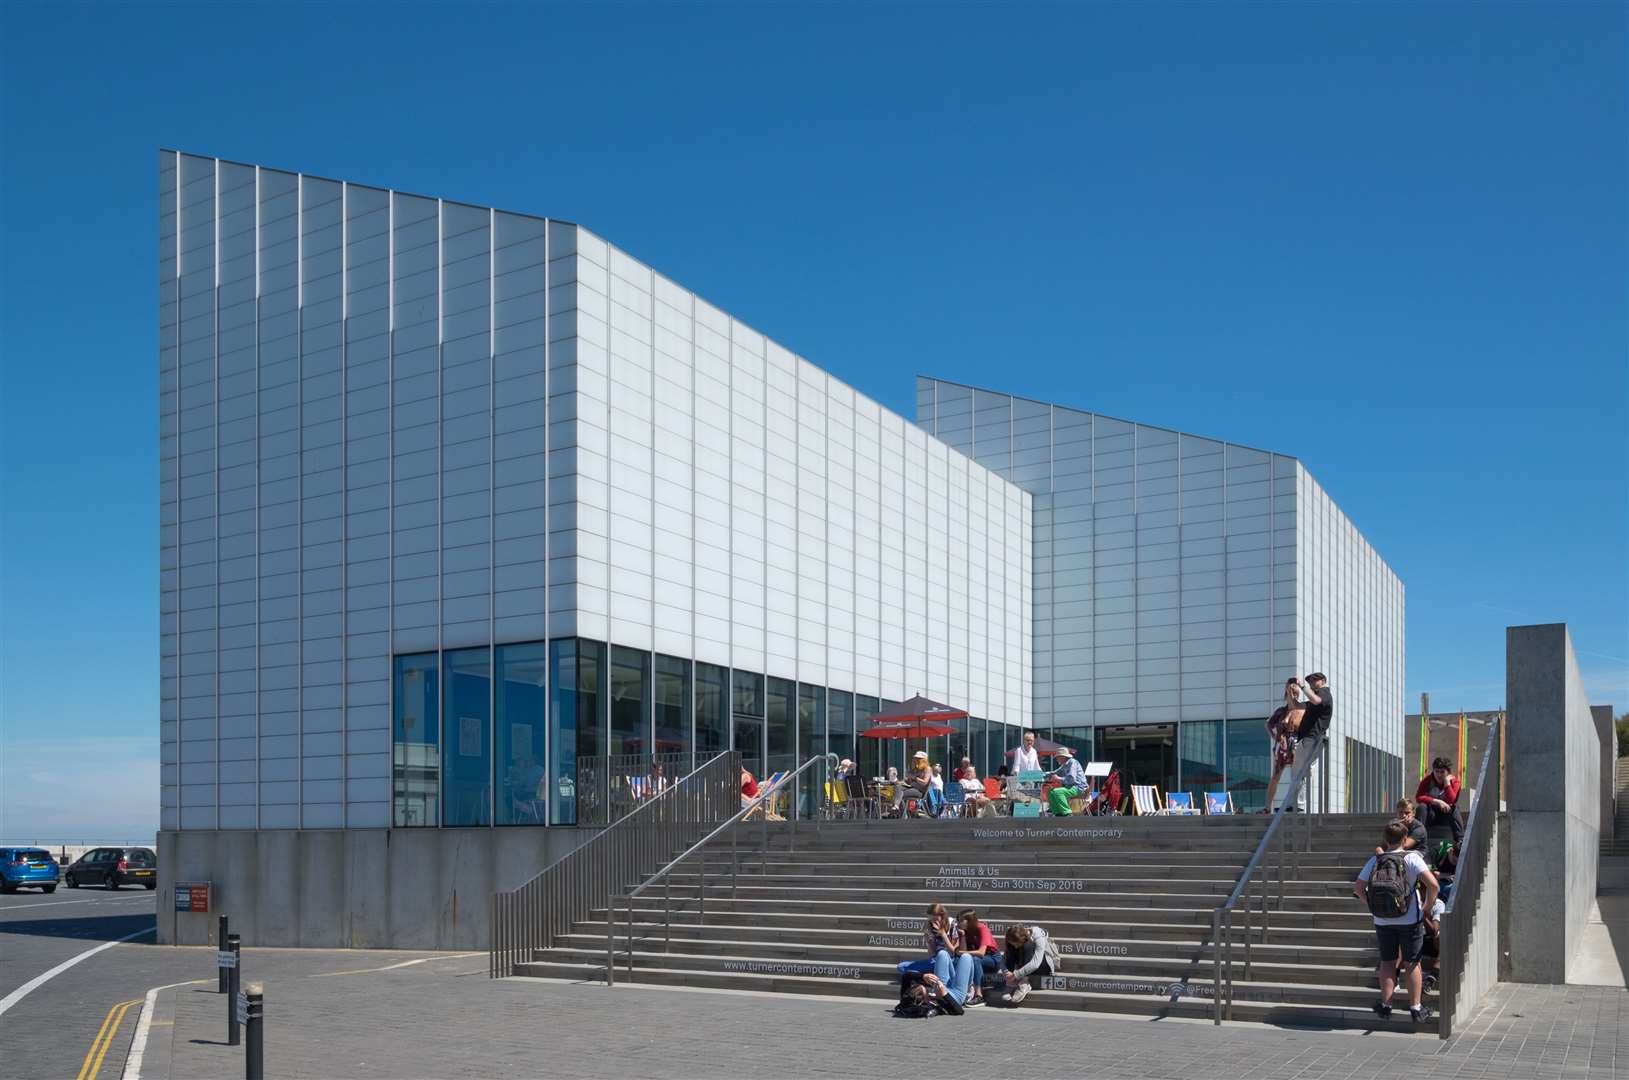 Natalia Ribbe’s previous restaurant, Barletta, was located inside the Turner Contemporary in Margate